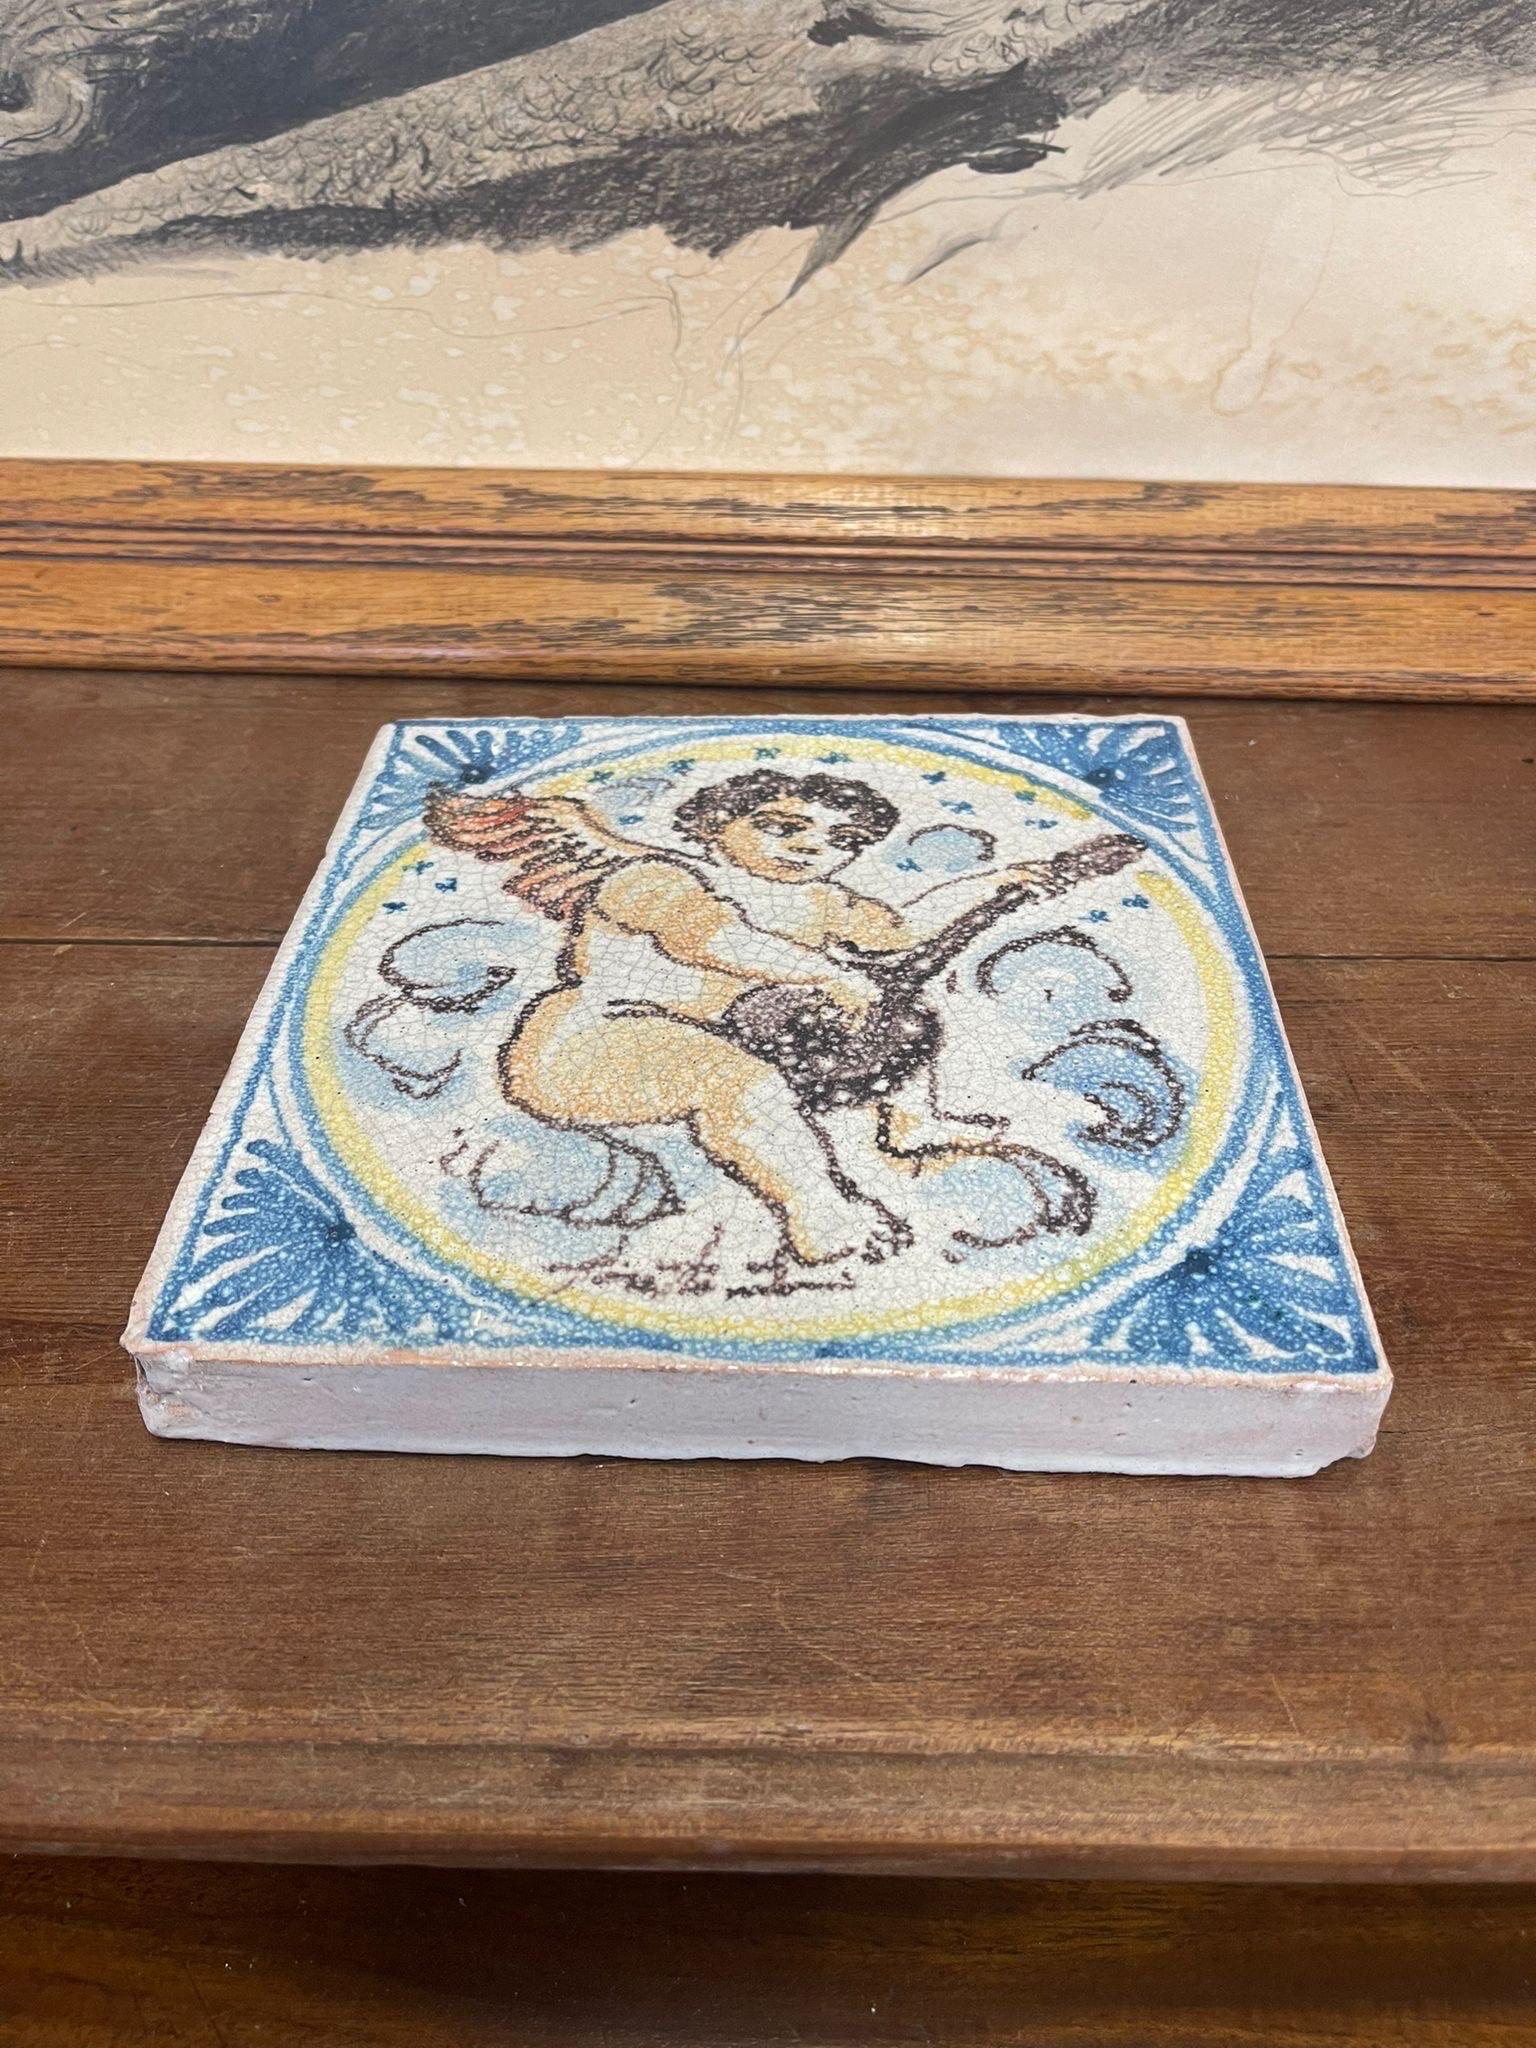 Makers mark on the bottom shows that this tile was made by Fratantoni Ceramiche, a tiling company based out of Italy. Beautiful Cherub motif adorns the Ceramic tile Blue and Yellow highlights. Vintage Condition Consistent with Age as